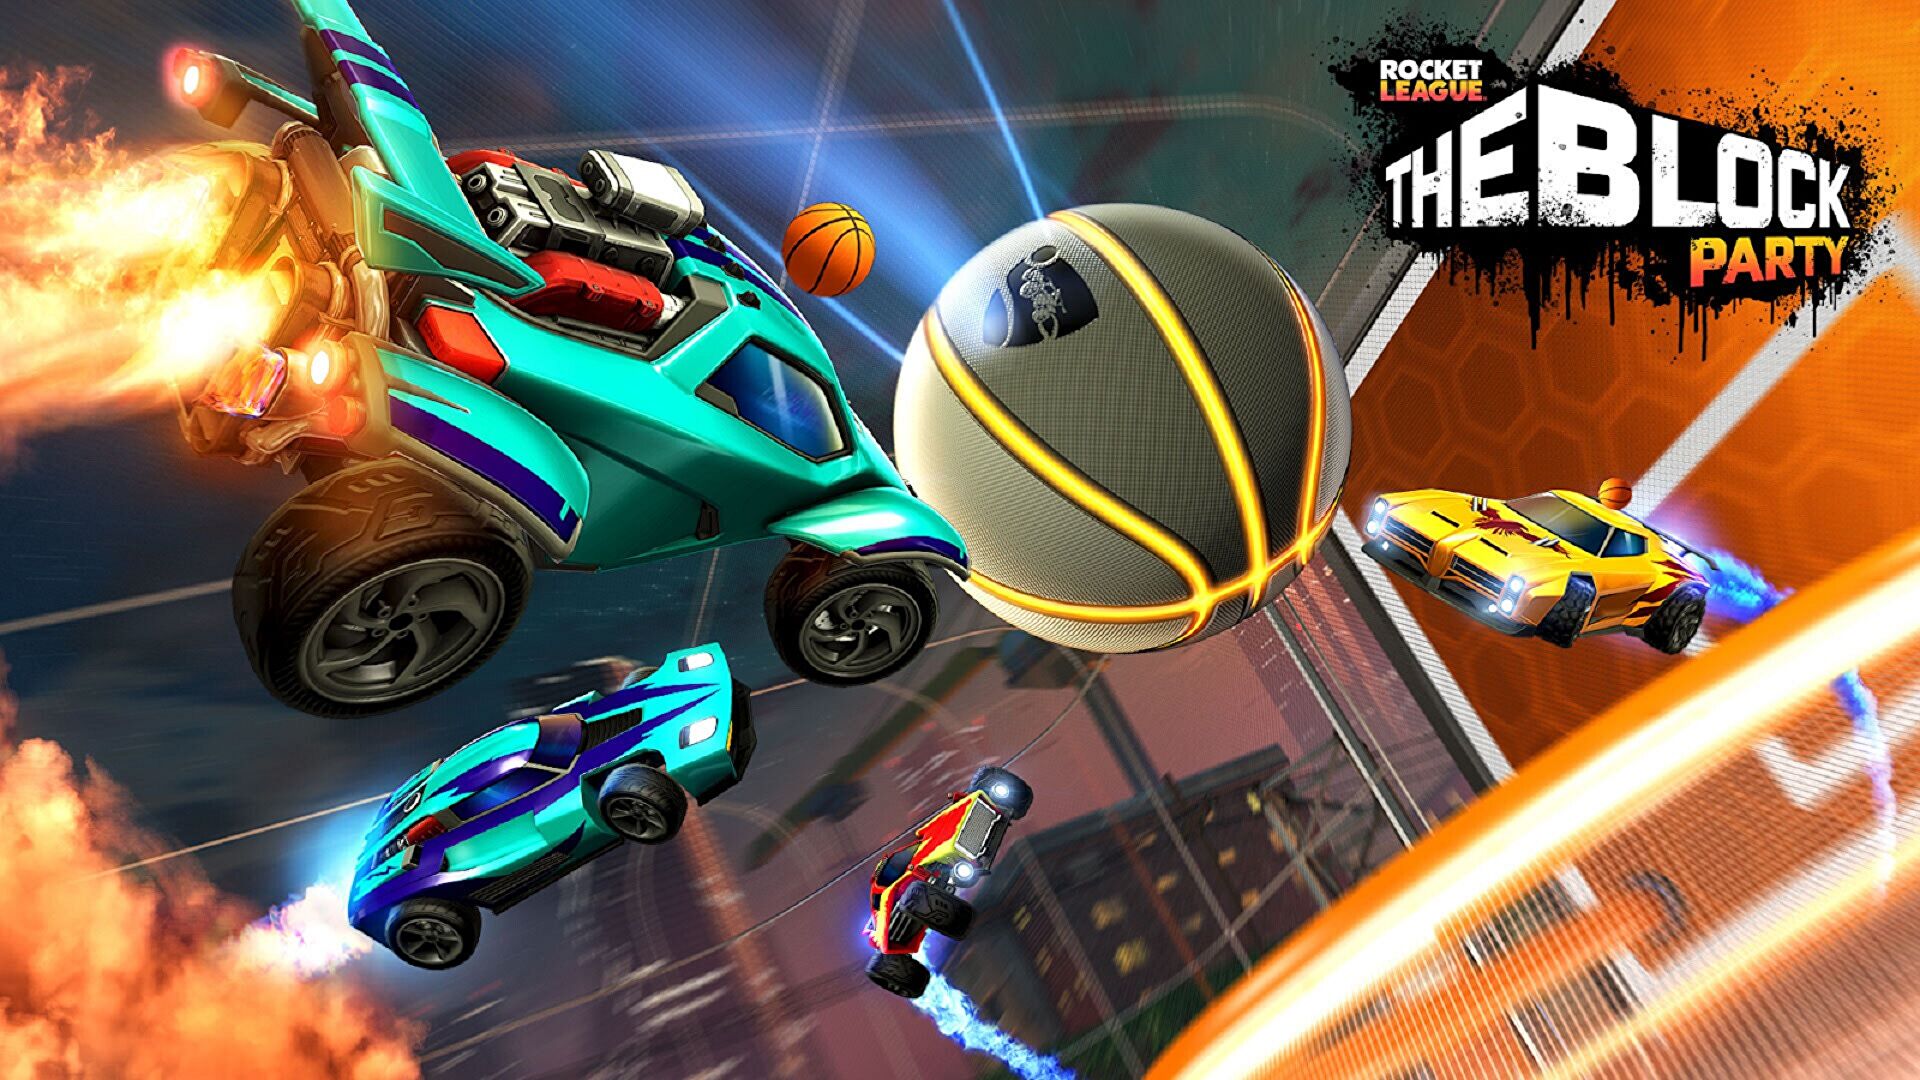 Rocket League gets new basketball themed event – for those bored of good ol’ football